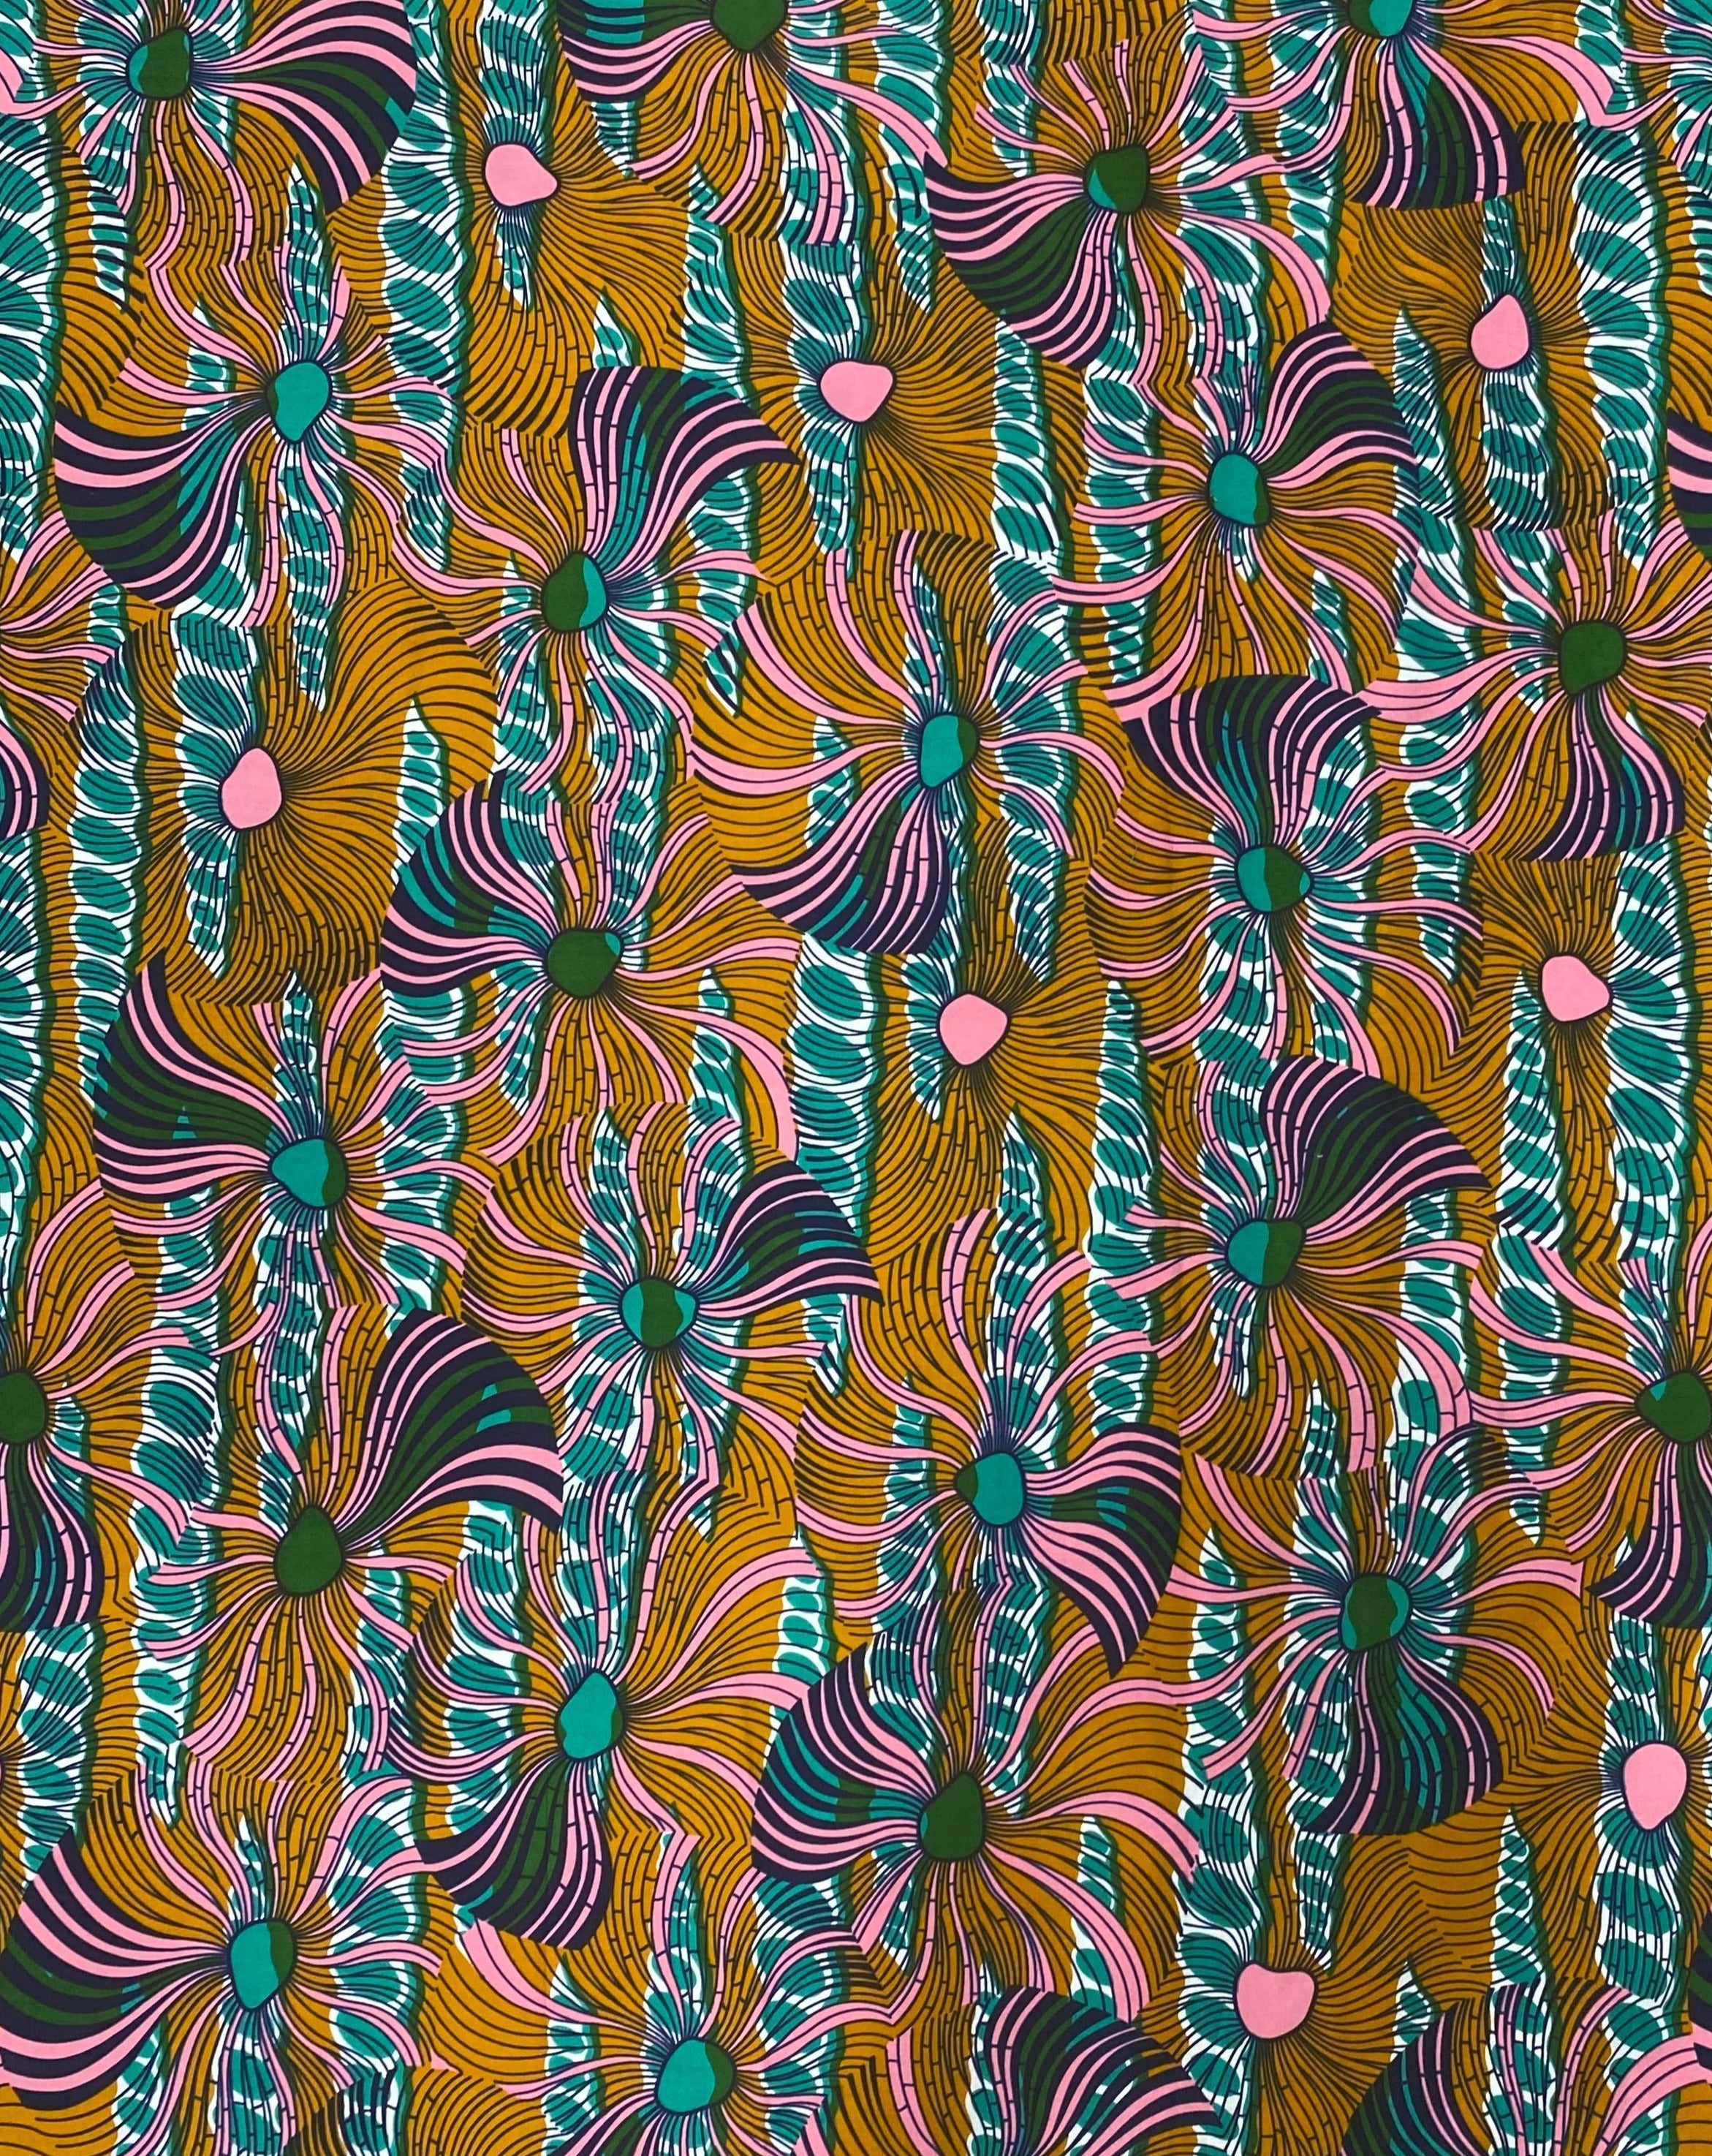 Trip to the Tropics African Print Fabric - 100% Cotton, 44" Wide, Lush and Exotic